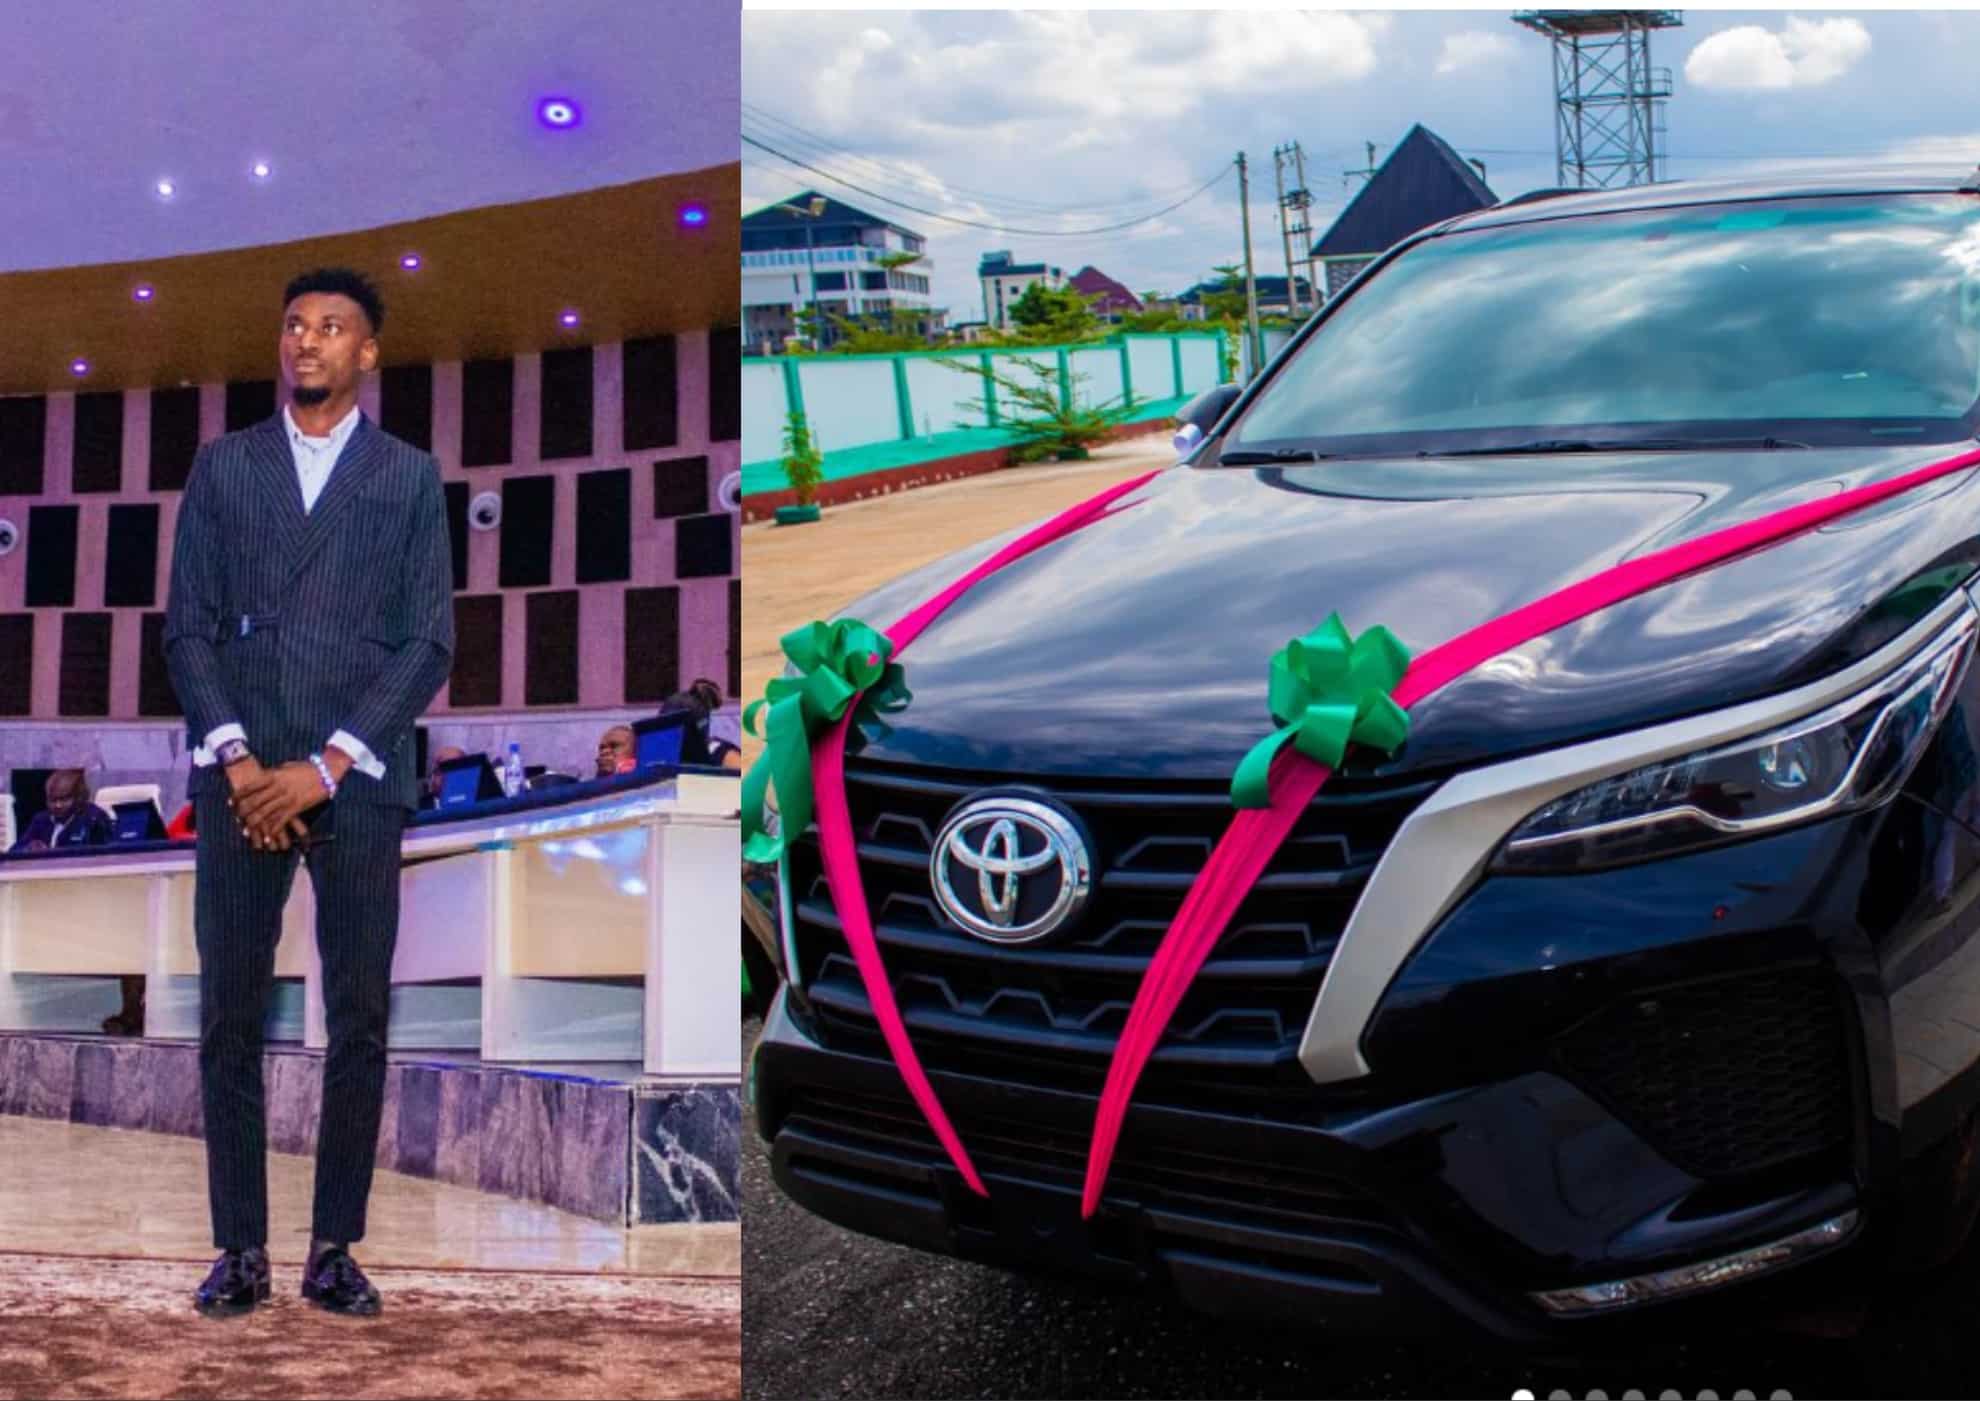 Ebonyi Govt Gifts Comedian SUV After Guinness World Record Feat